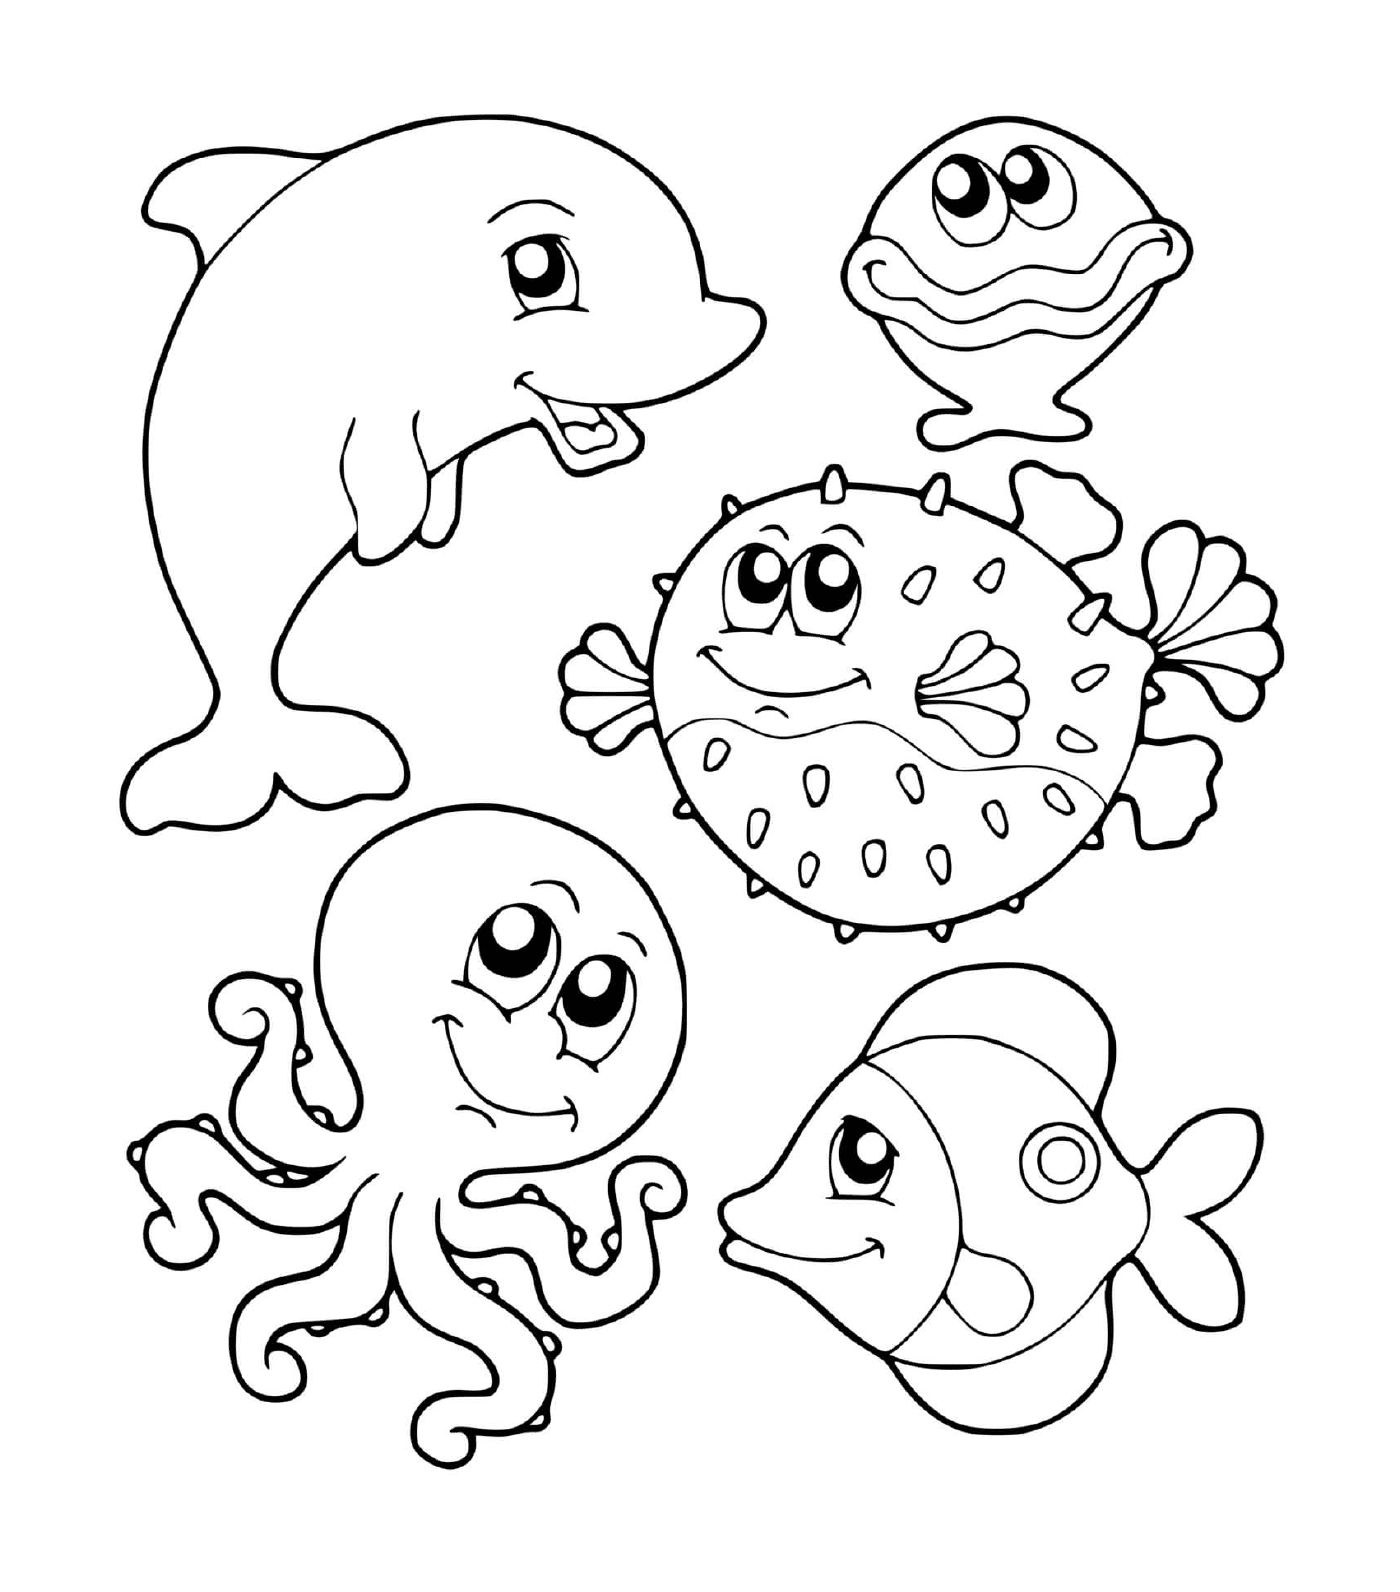  Group of marine animals in the water 